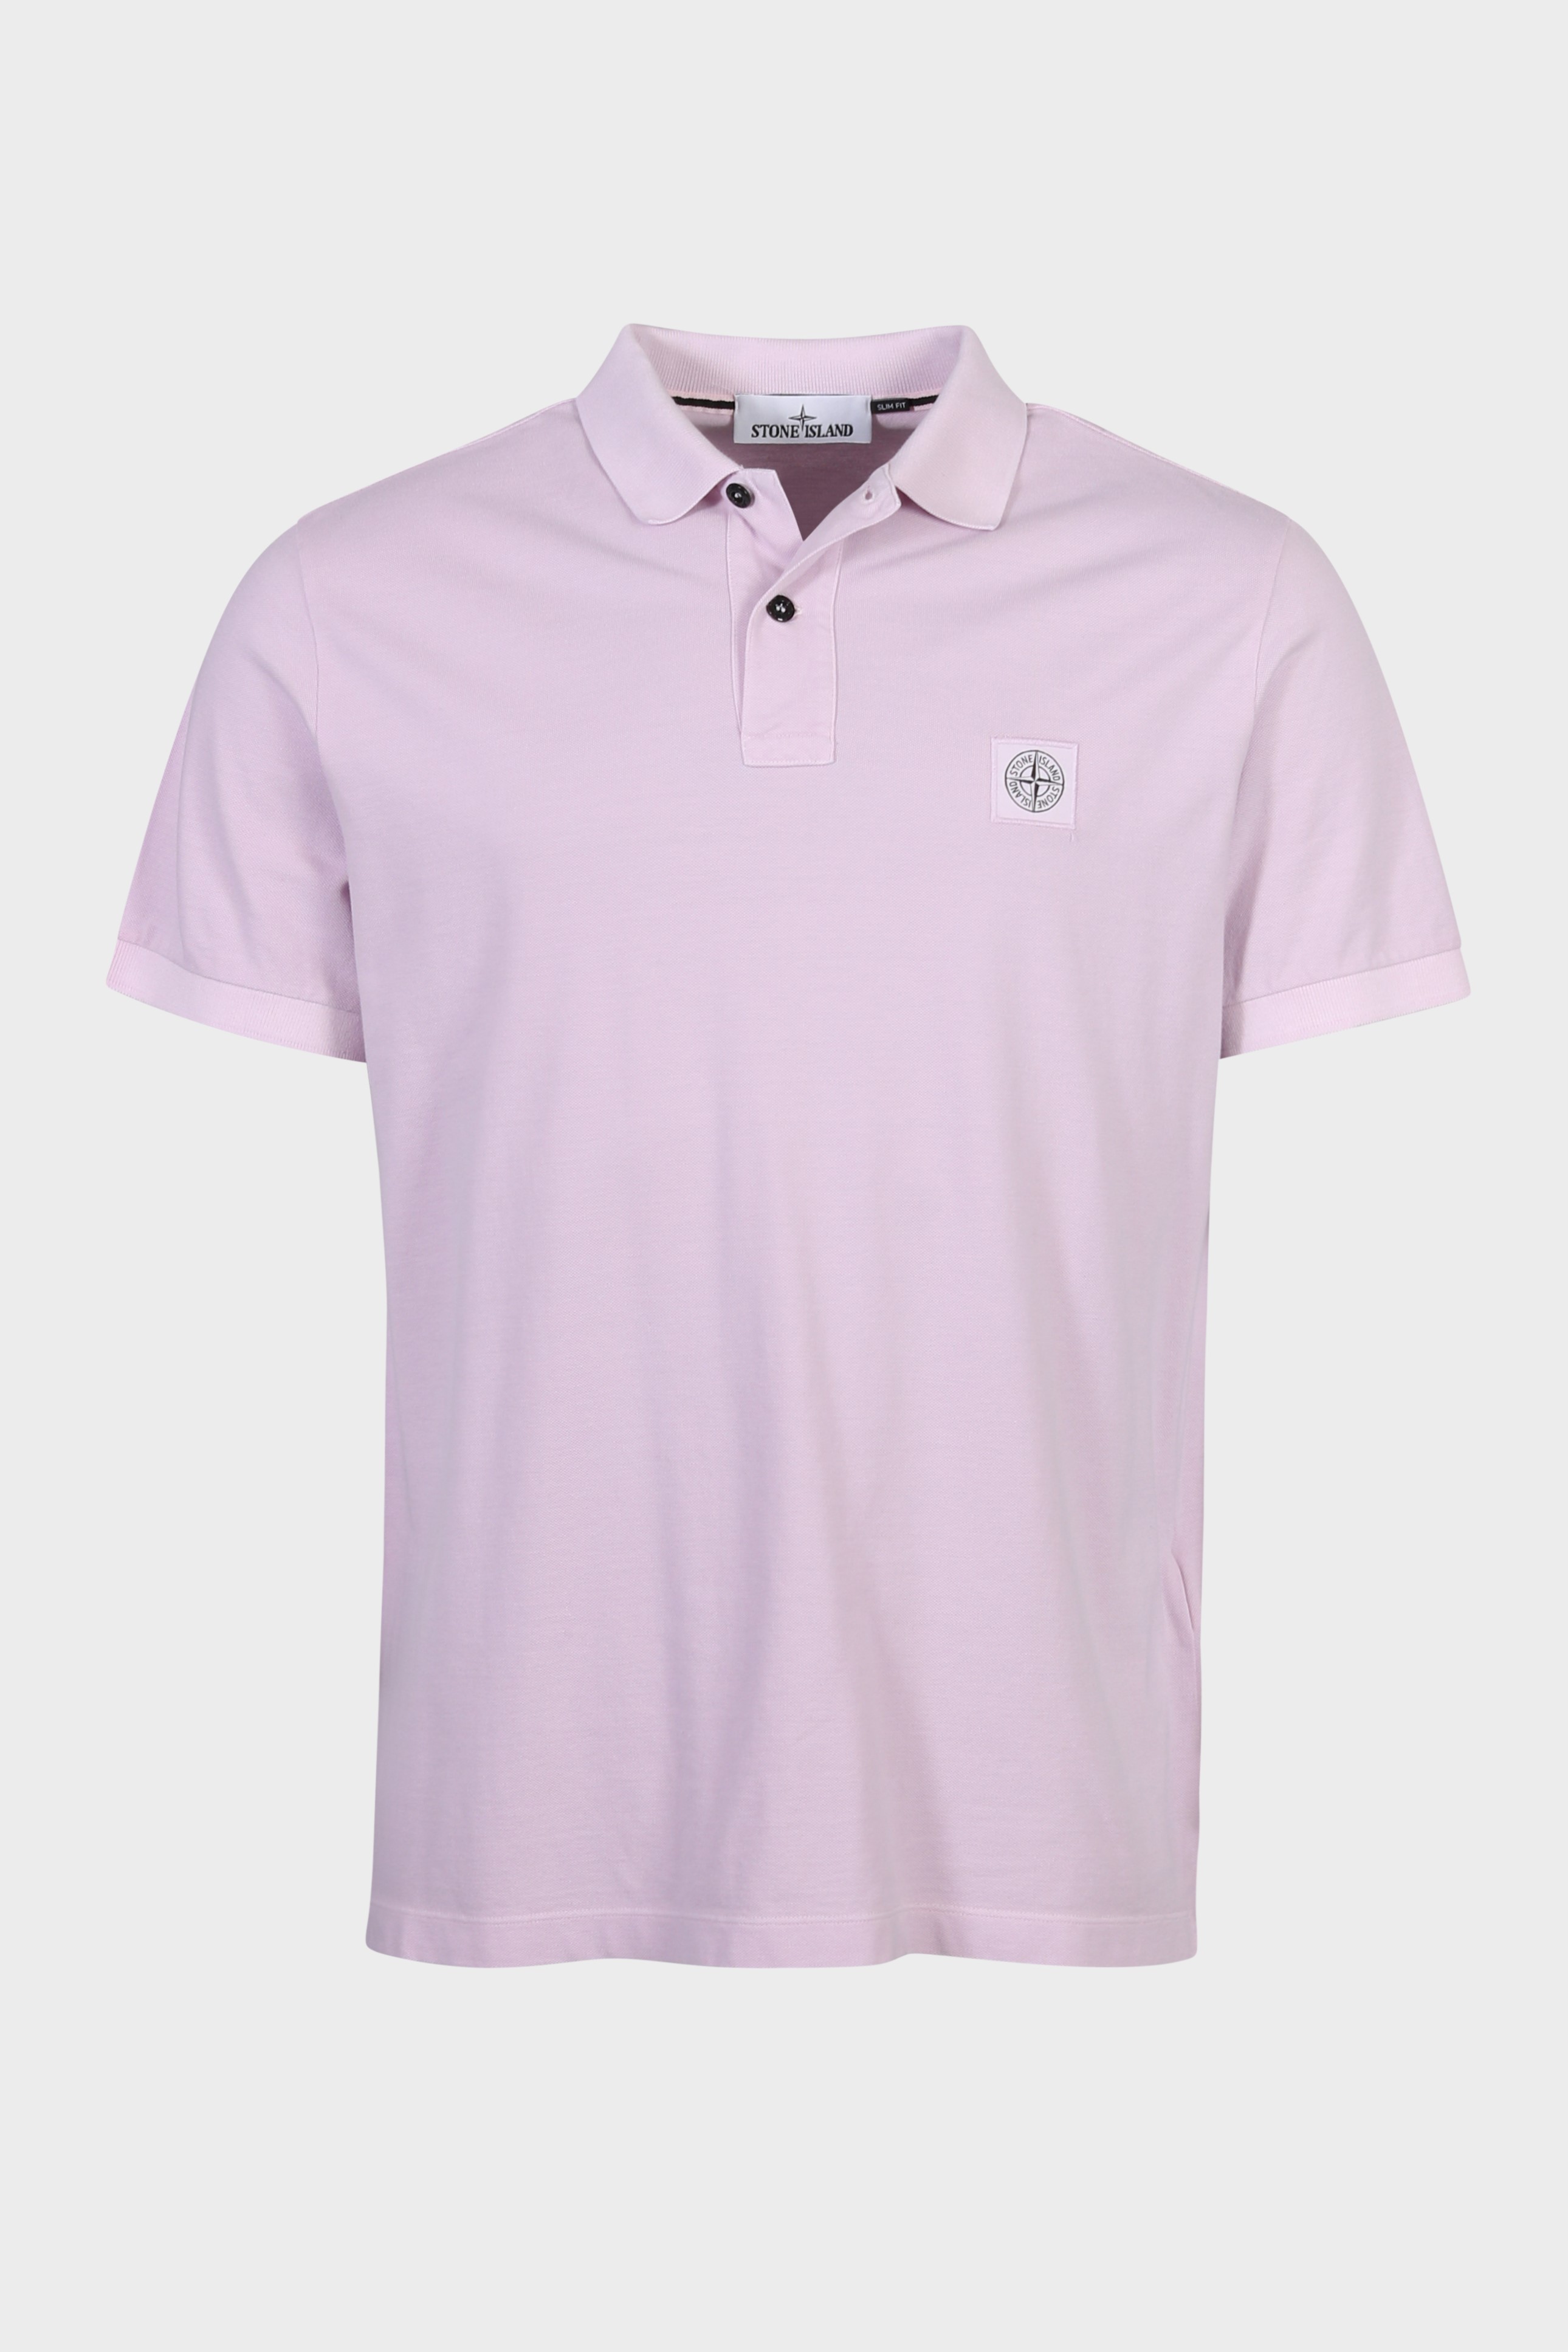 STONE ISLAND Polo Shirt in Light Pink L